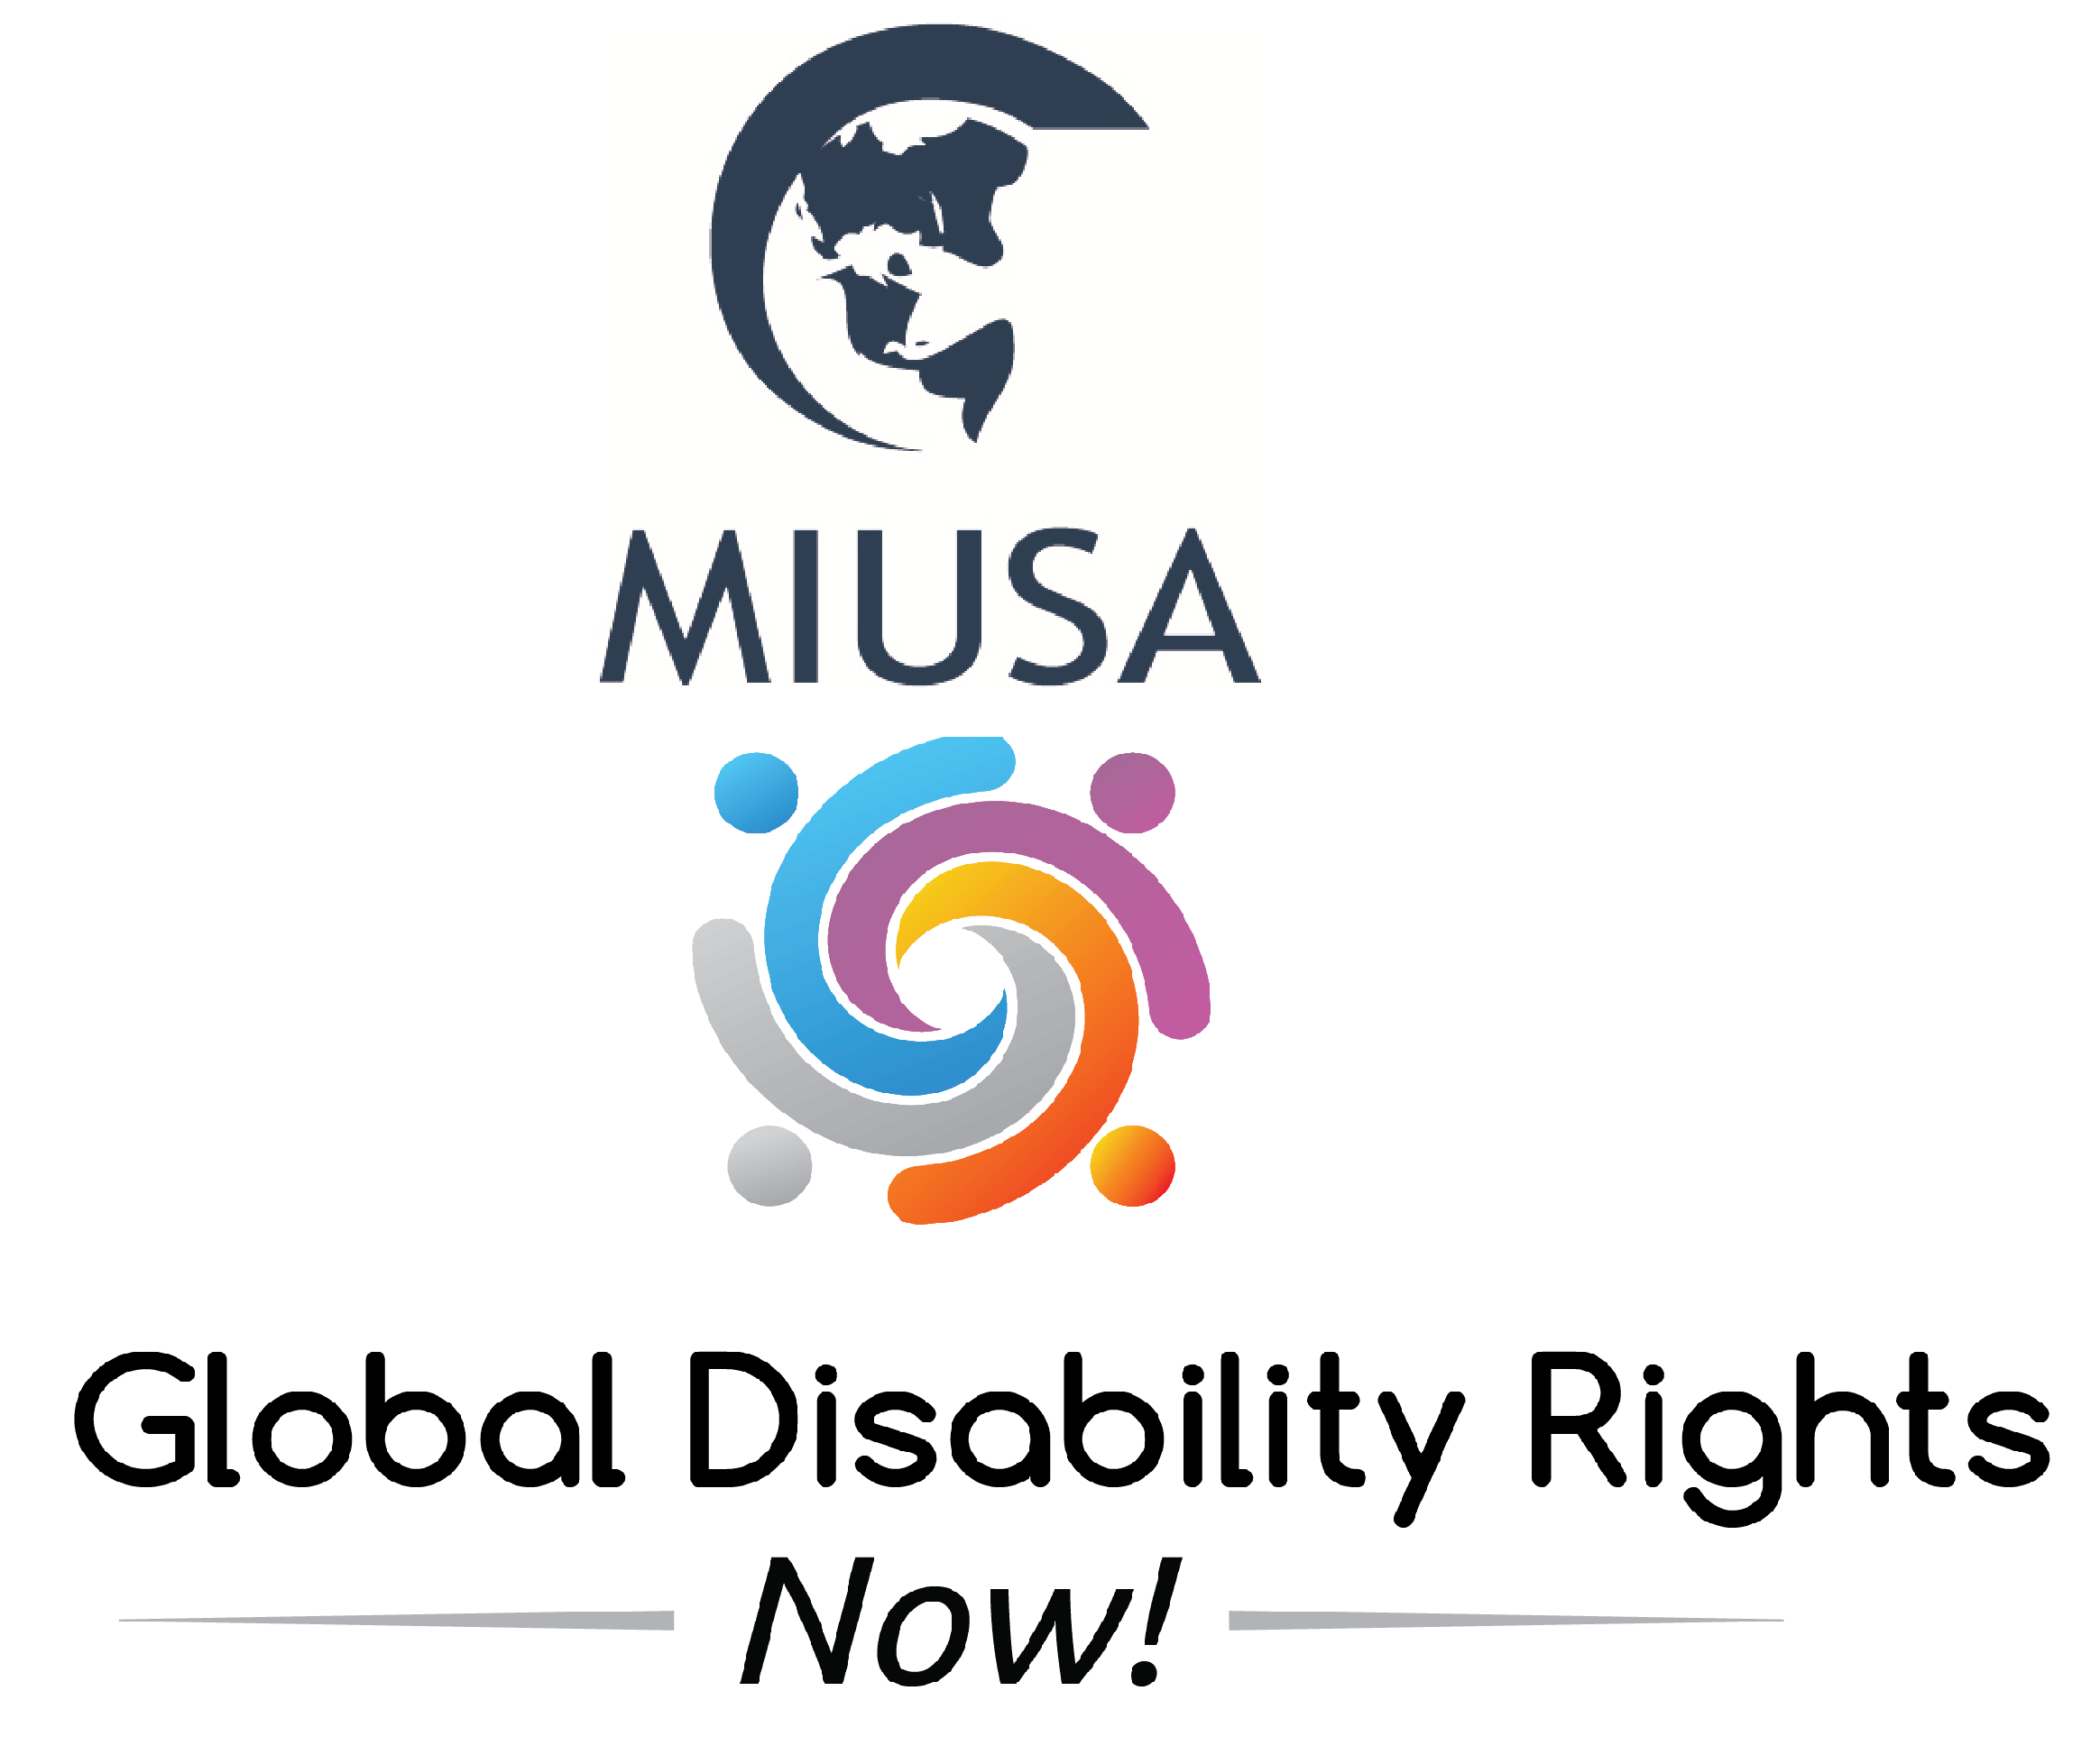 Website - Logo - https://s39939.pcdn.co/wp-content/uploads/2018/11/MIUSA-Prmary-Global-logo.png